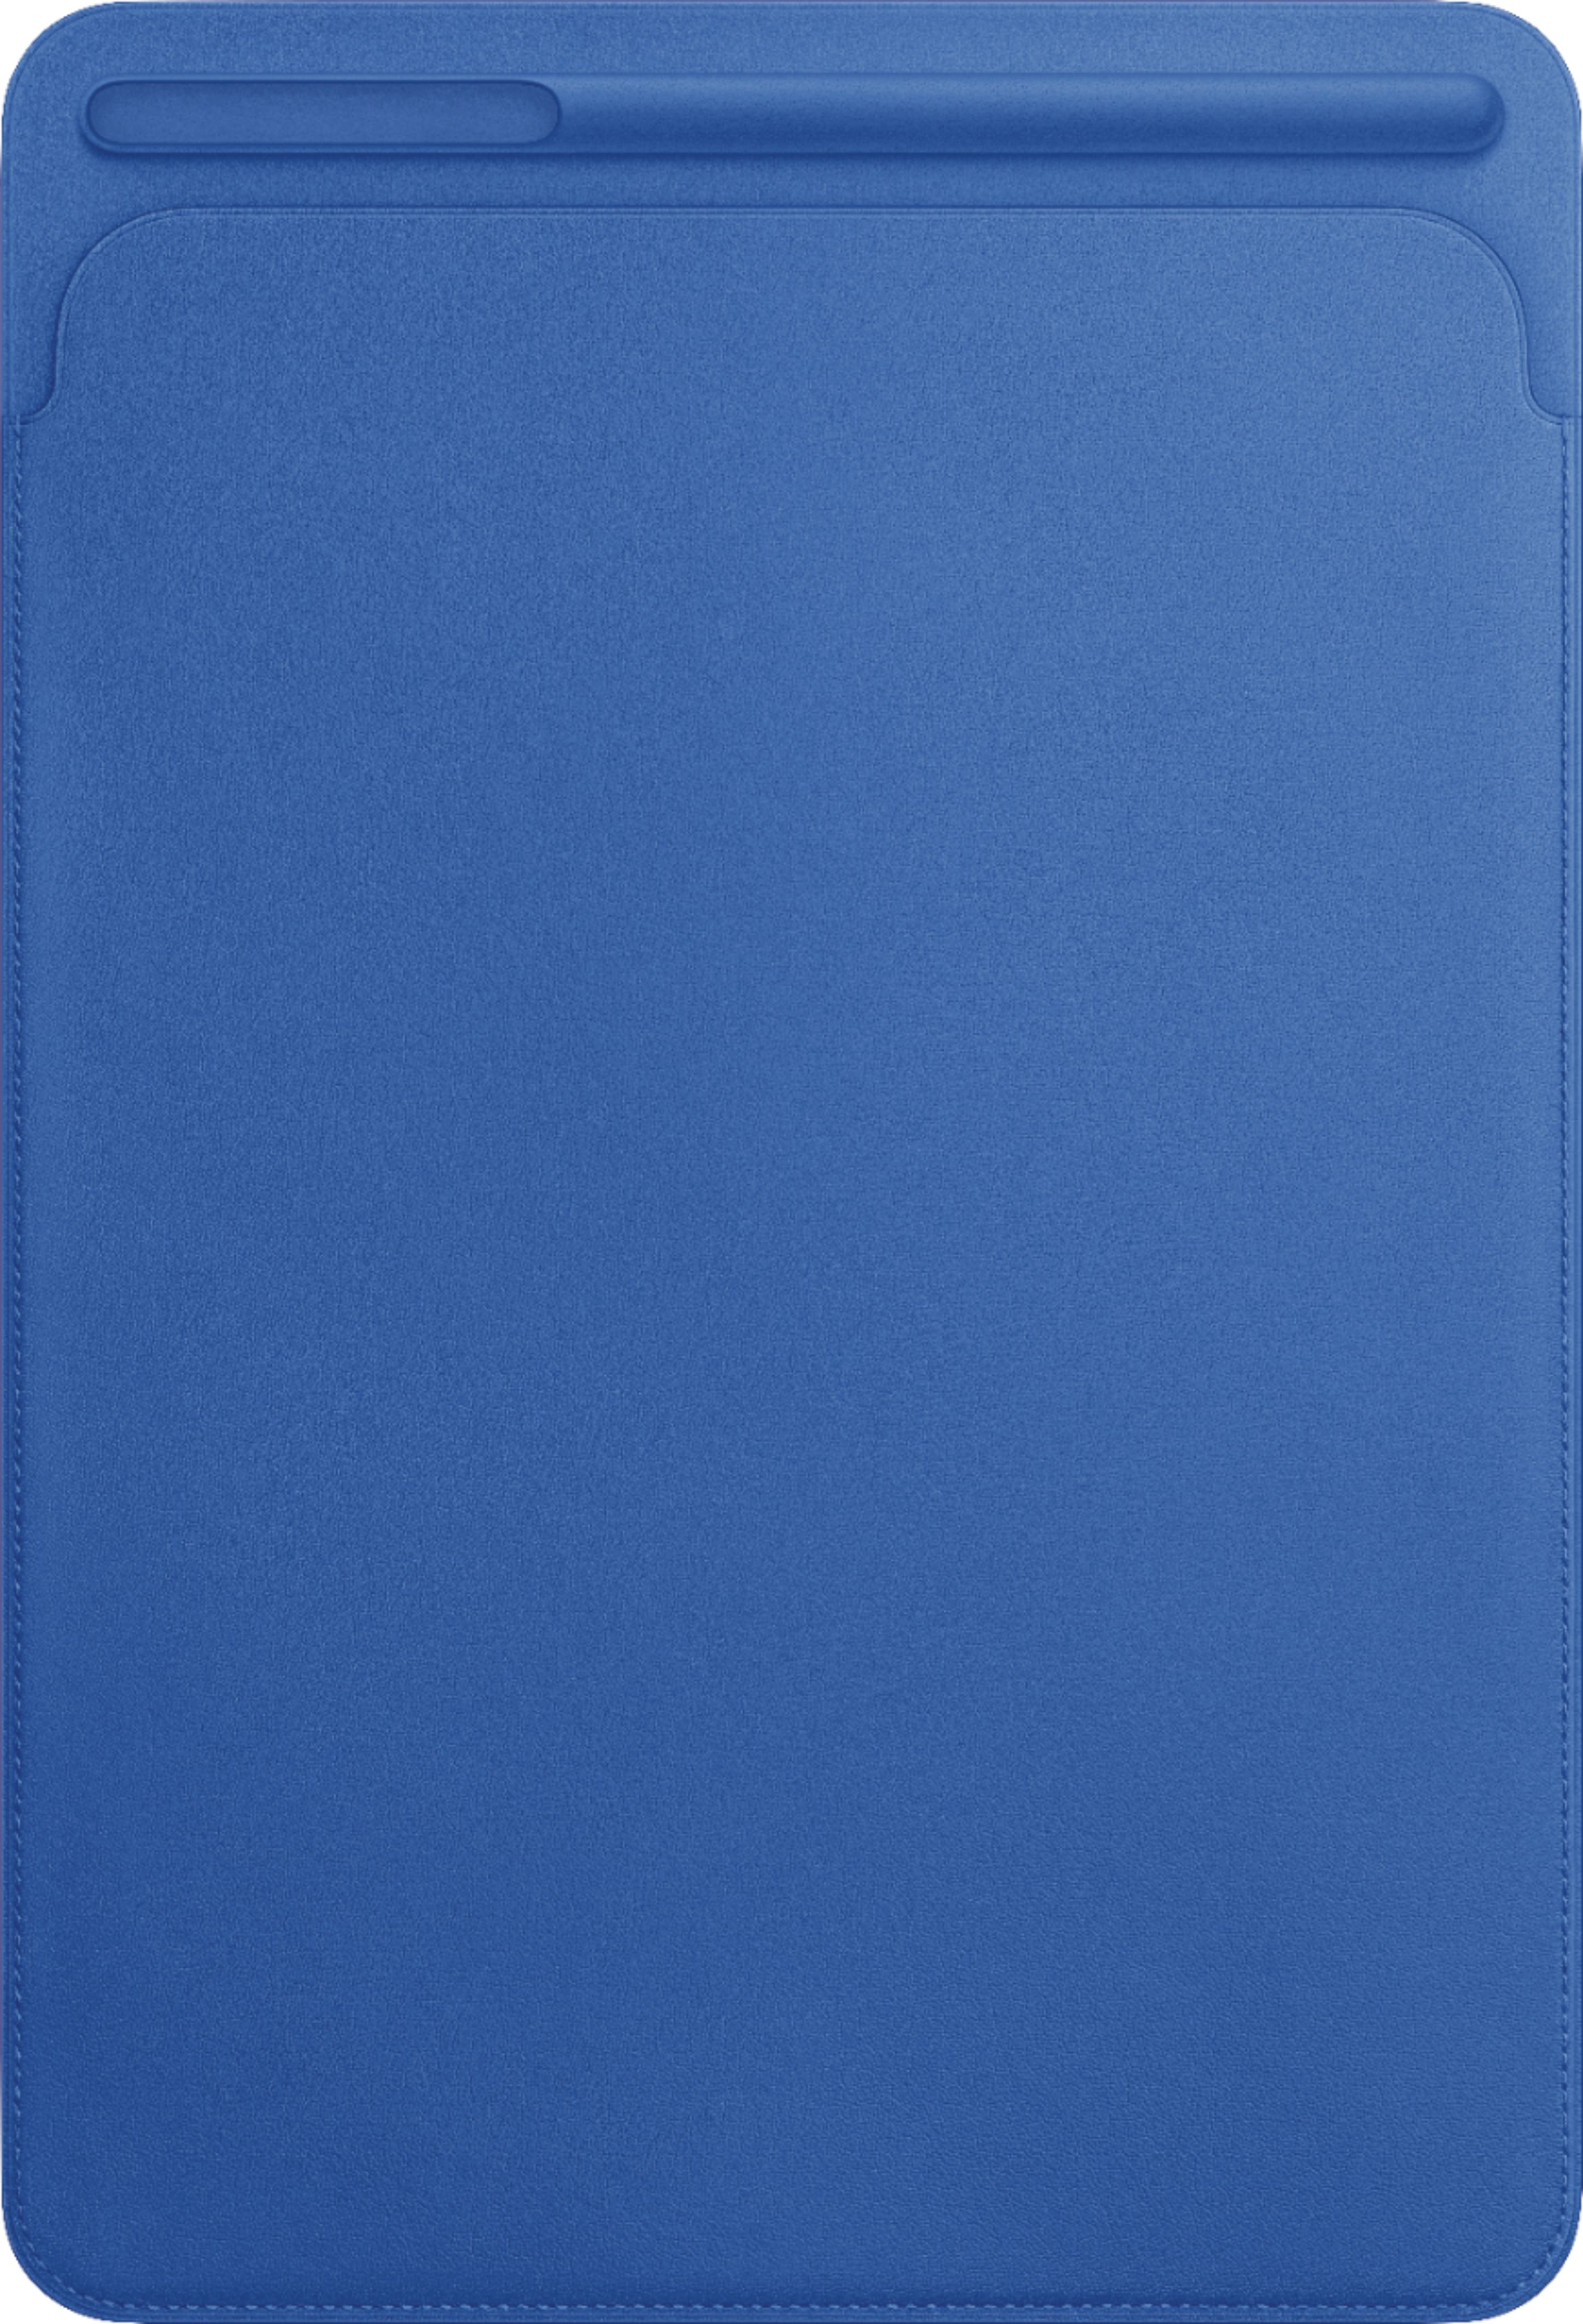 Apple - Leather Sleeve for 10.5-inch iPad Pro - Electric Blue